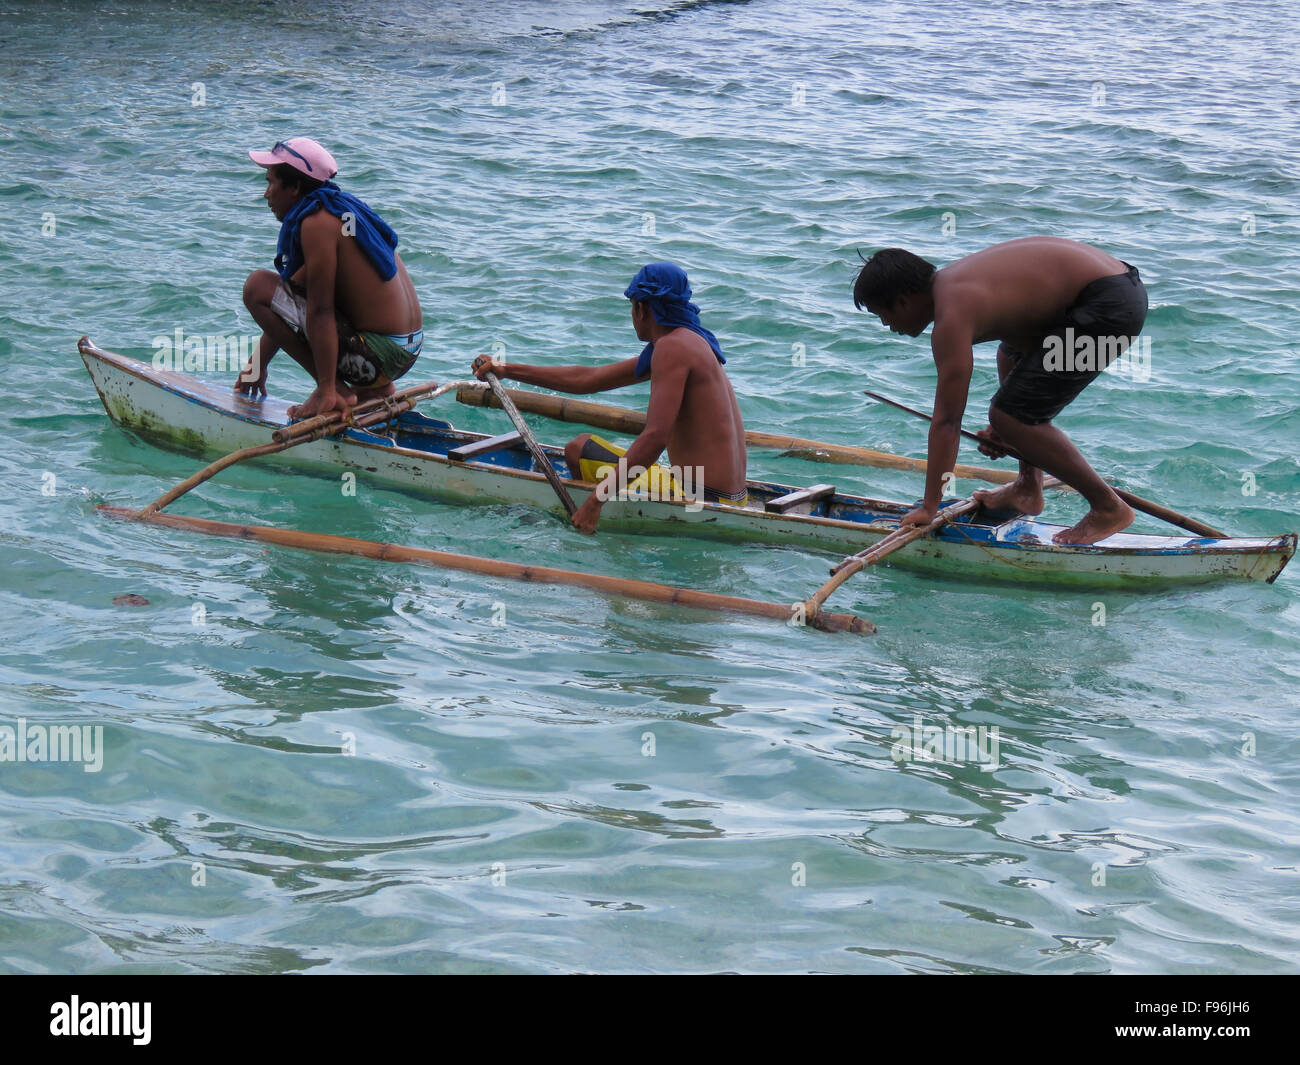 Three men and a small boat. Philippines. Stock Photo